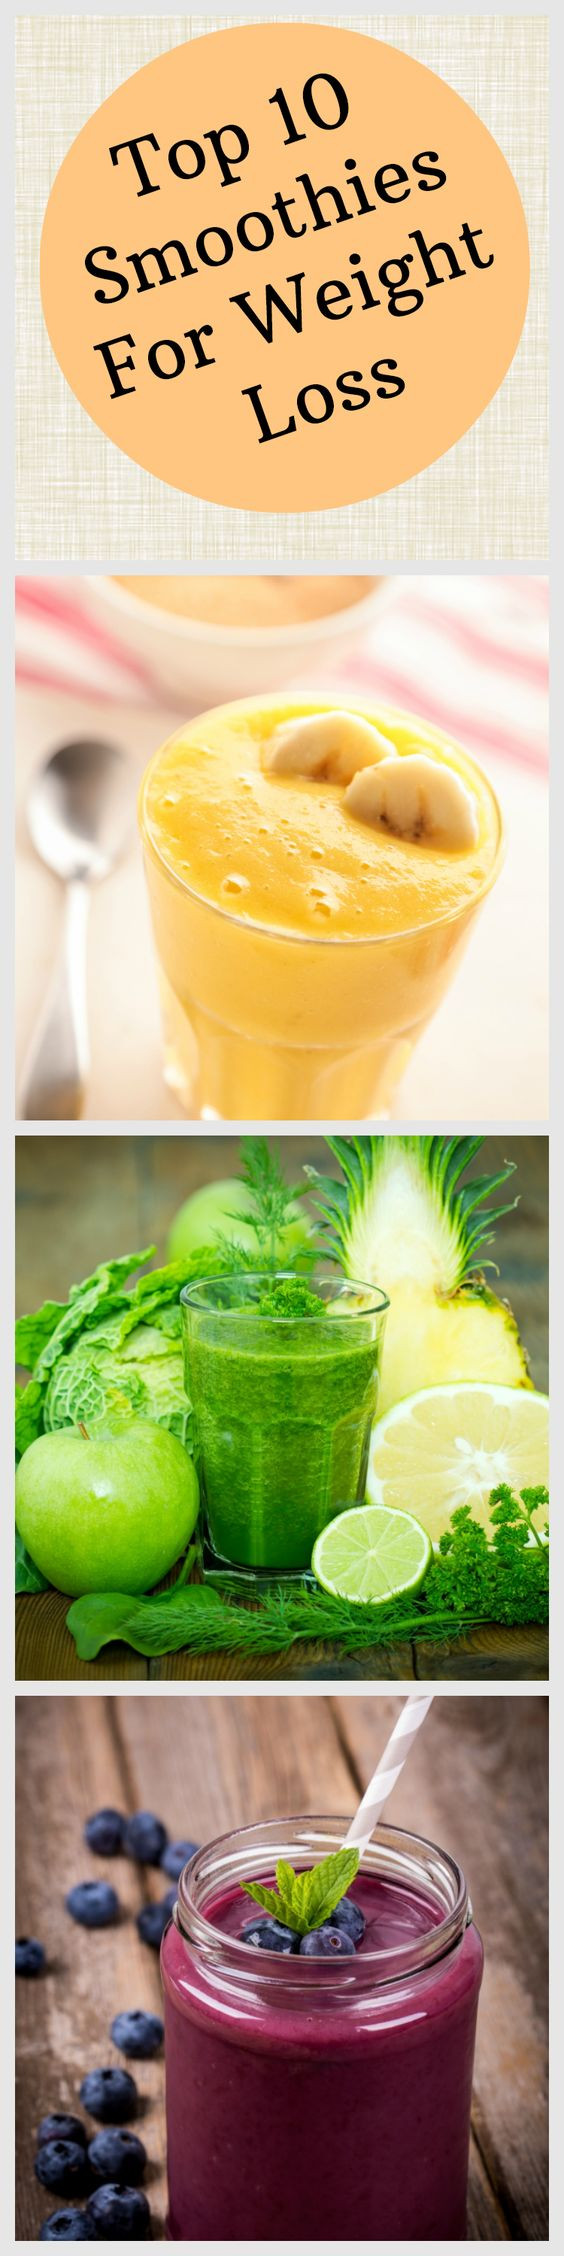 Vegetable Smoothies For Weight Loss
 10 Awesome Smoothies for Weight Loss All Nutribullet Recipes